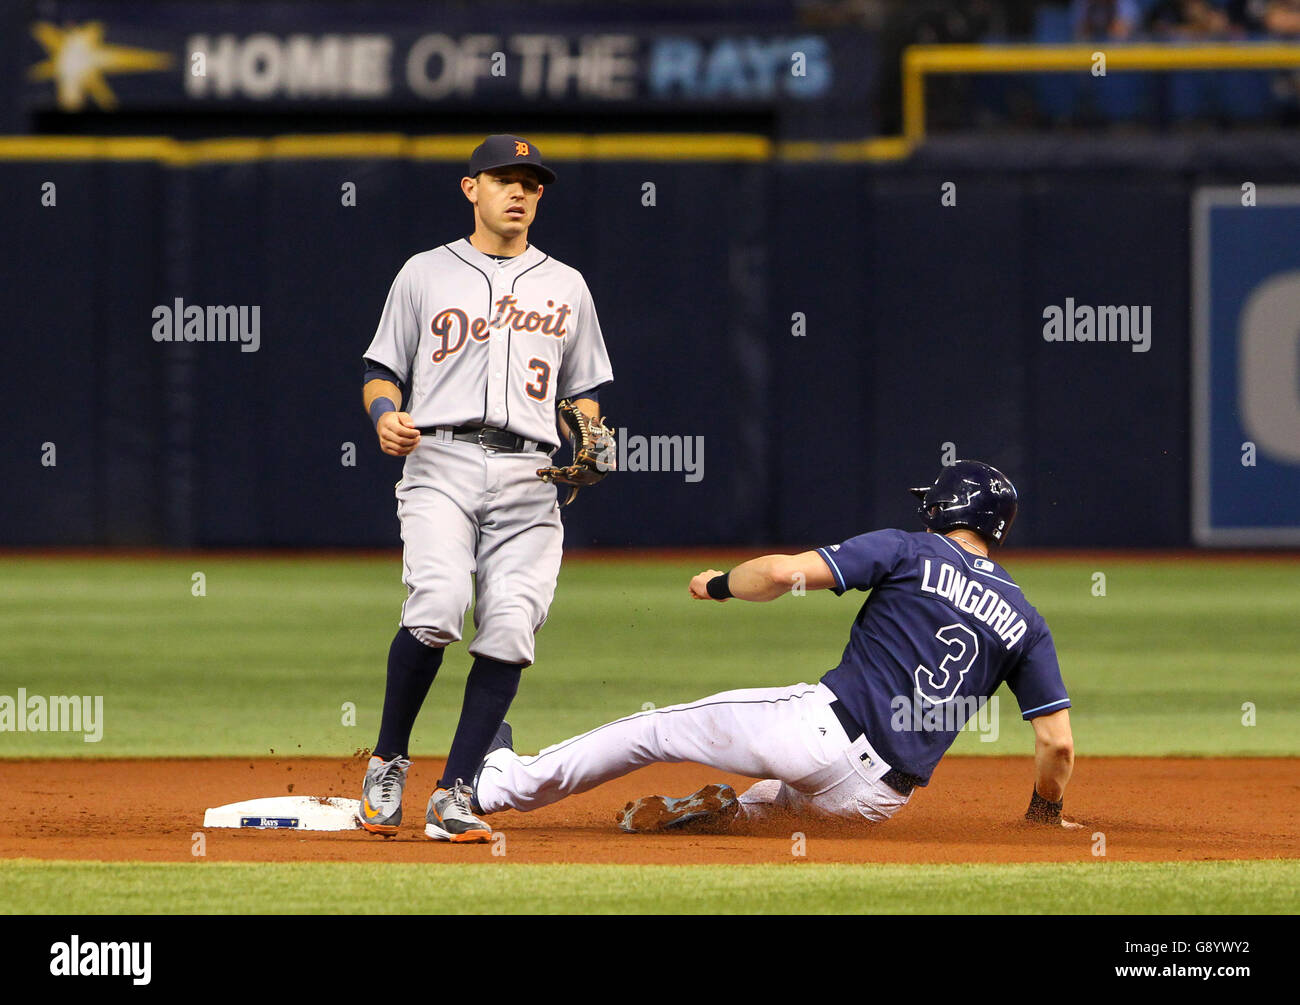 St. Petersburg, Florida, USA. 30th June, 2016. WILL VRAGOVIC | Times.Tampa Bay Rays third baseman Evan Longoria (3) advances to second on a wild pitch by Detroit Tigers starting pitcher Jordan Zimmermann (27) in the first inning of the game between the Detroit Tigers and the Tampa Bay Rays in Tropicana Field in St. Petersburg, Fla. on Thursday, June 30, 2016 Credit:  Will Vragovic/Tampa Bay Times/ZUMA Wire/Alamy Live News Stock Photo